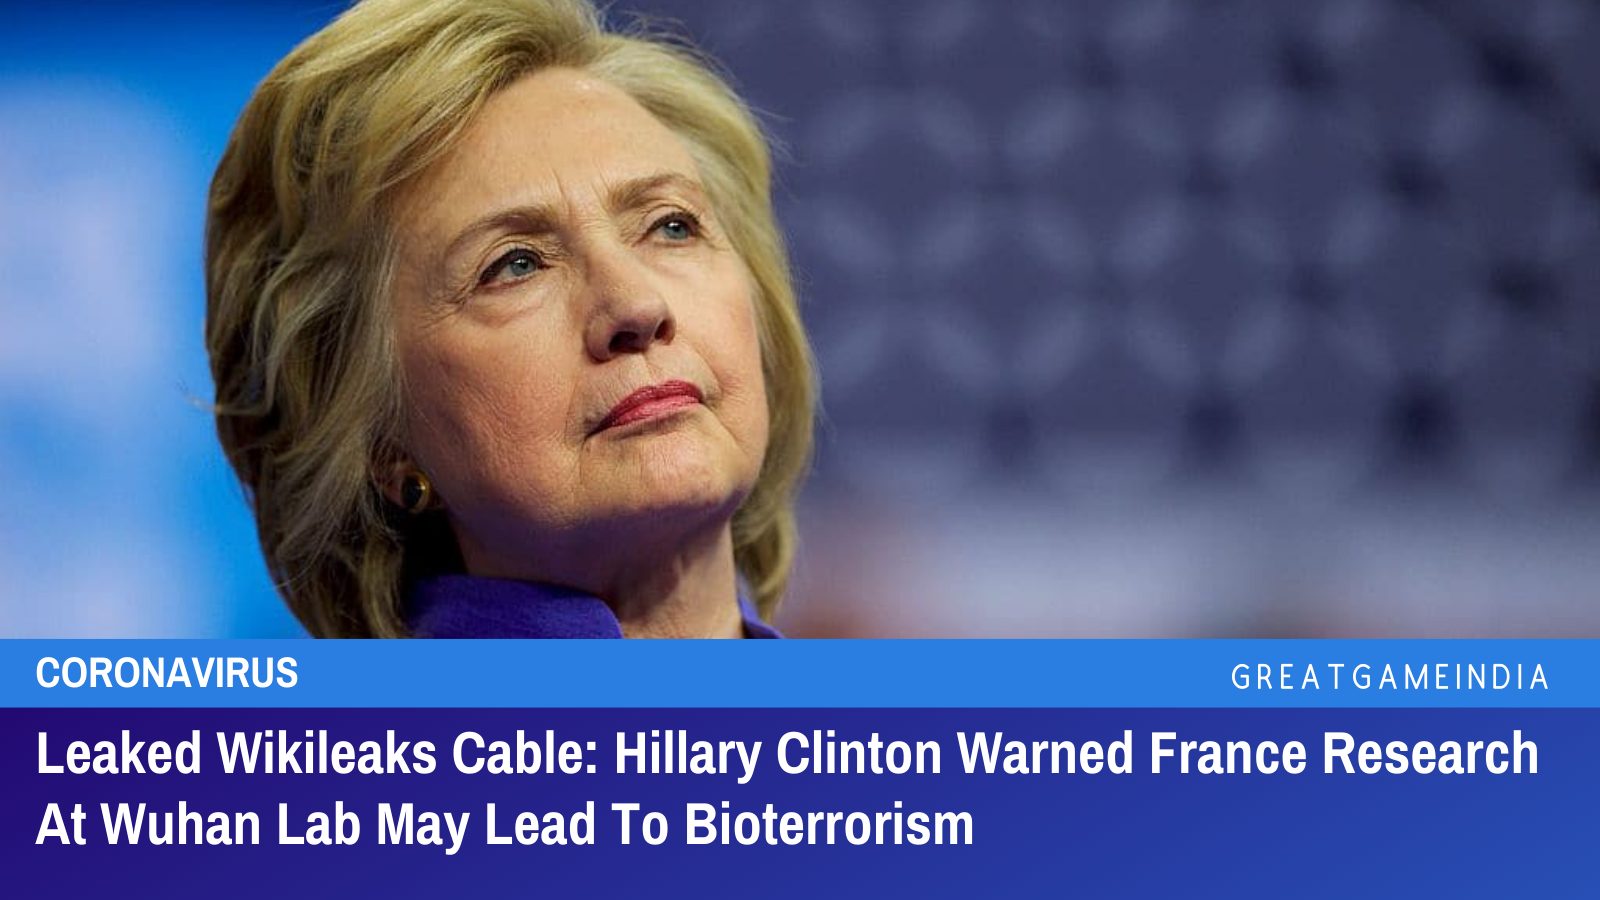 Leaked Wikileaks Cable: Hillary Clinton Warned France Research At Wuhan Lab May Lead To Bioterrorism